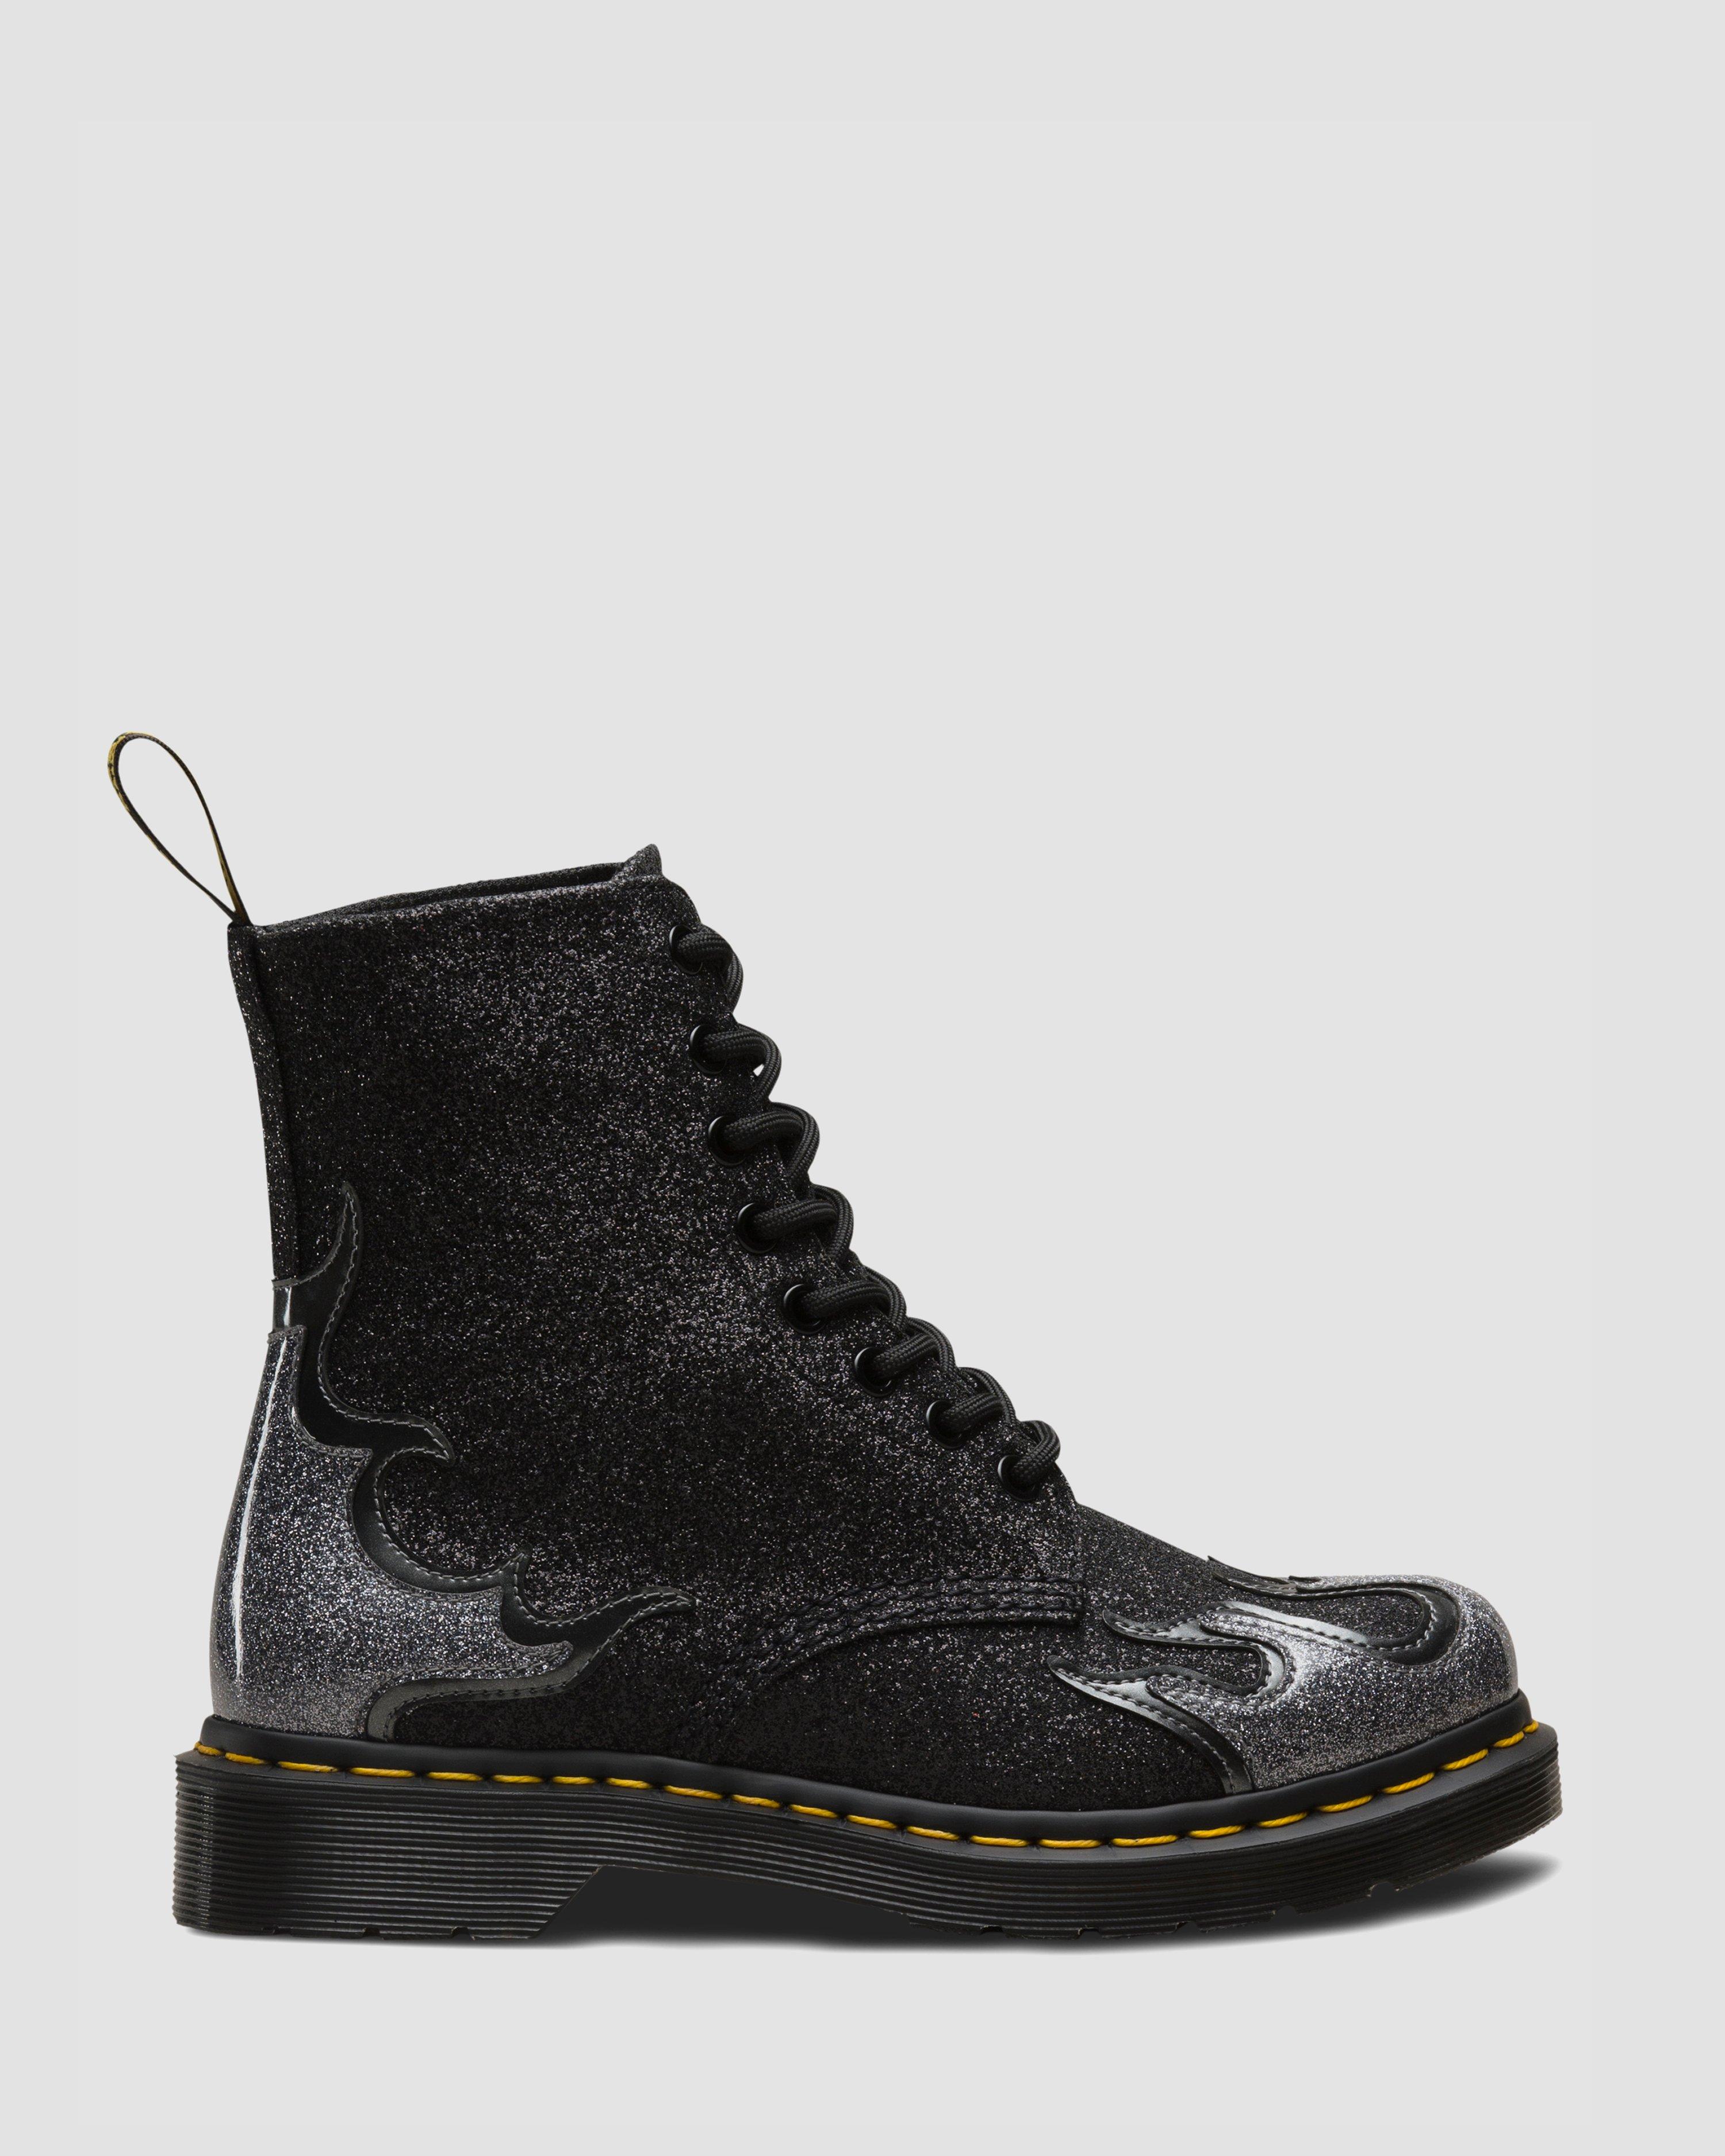 1460 PASCAL FLAME | Dr. Martens Official